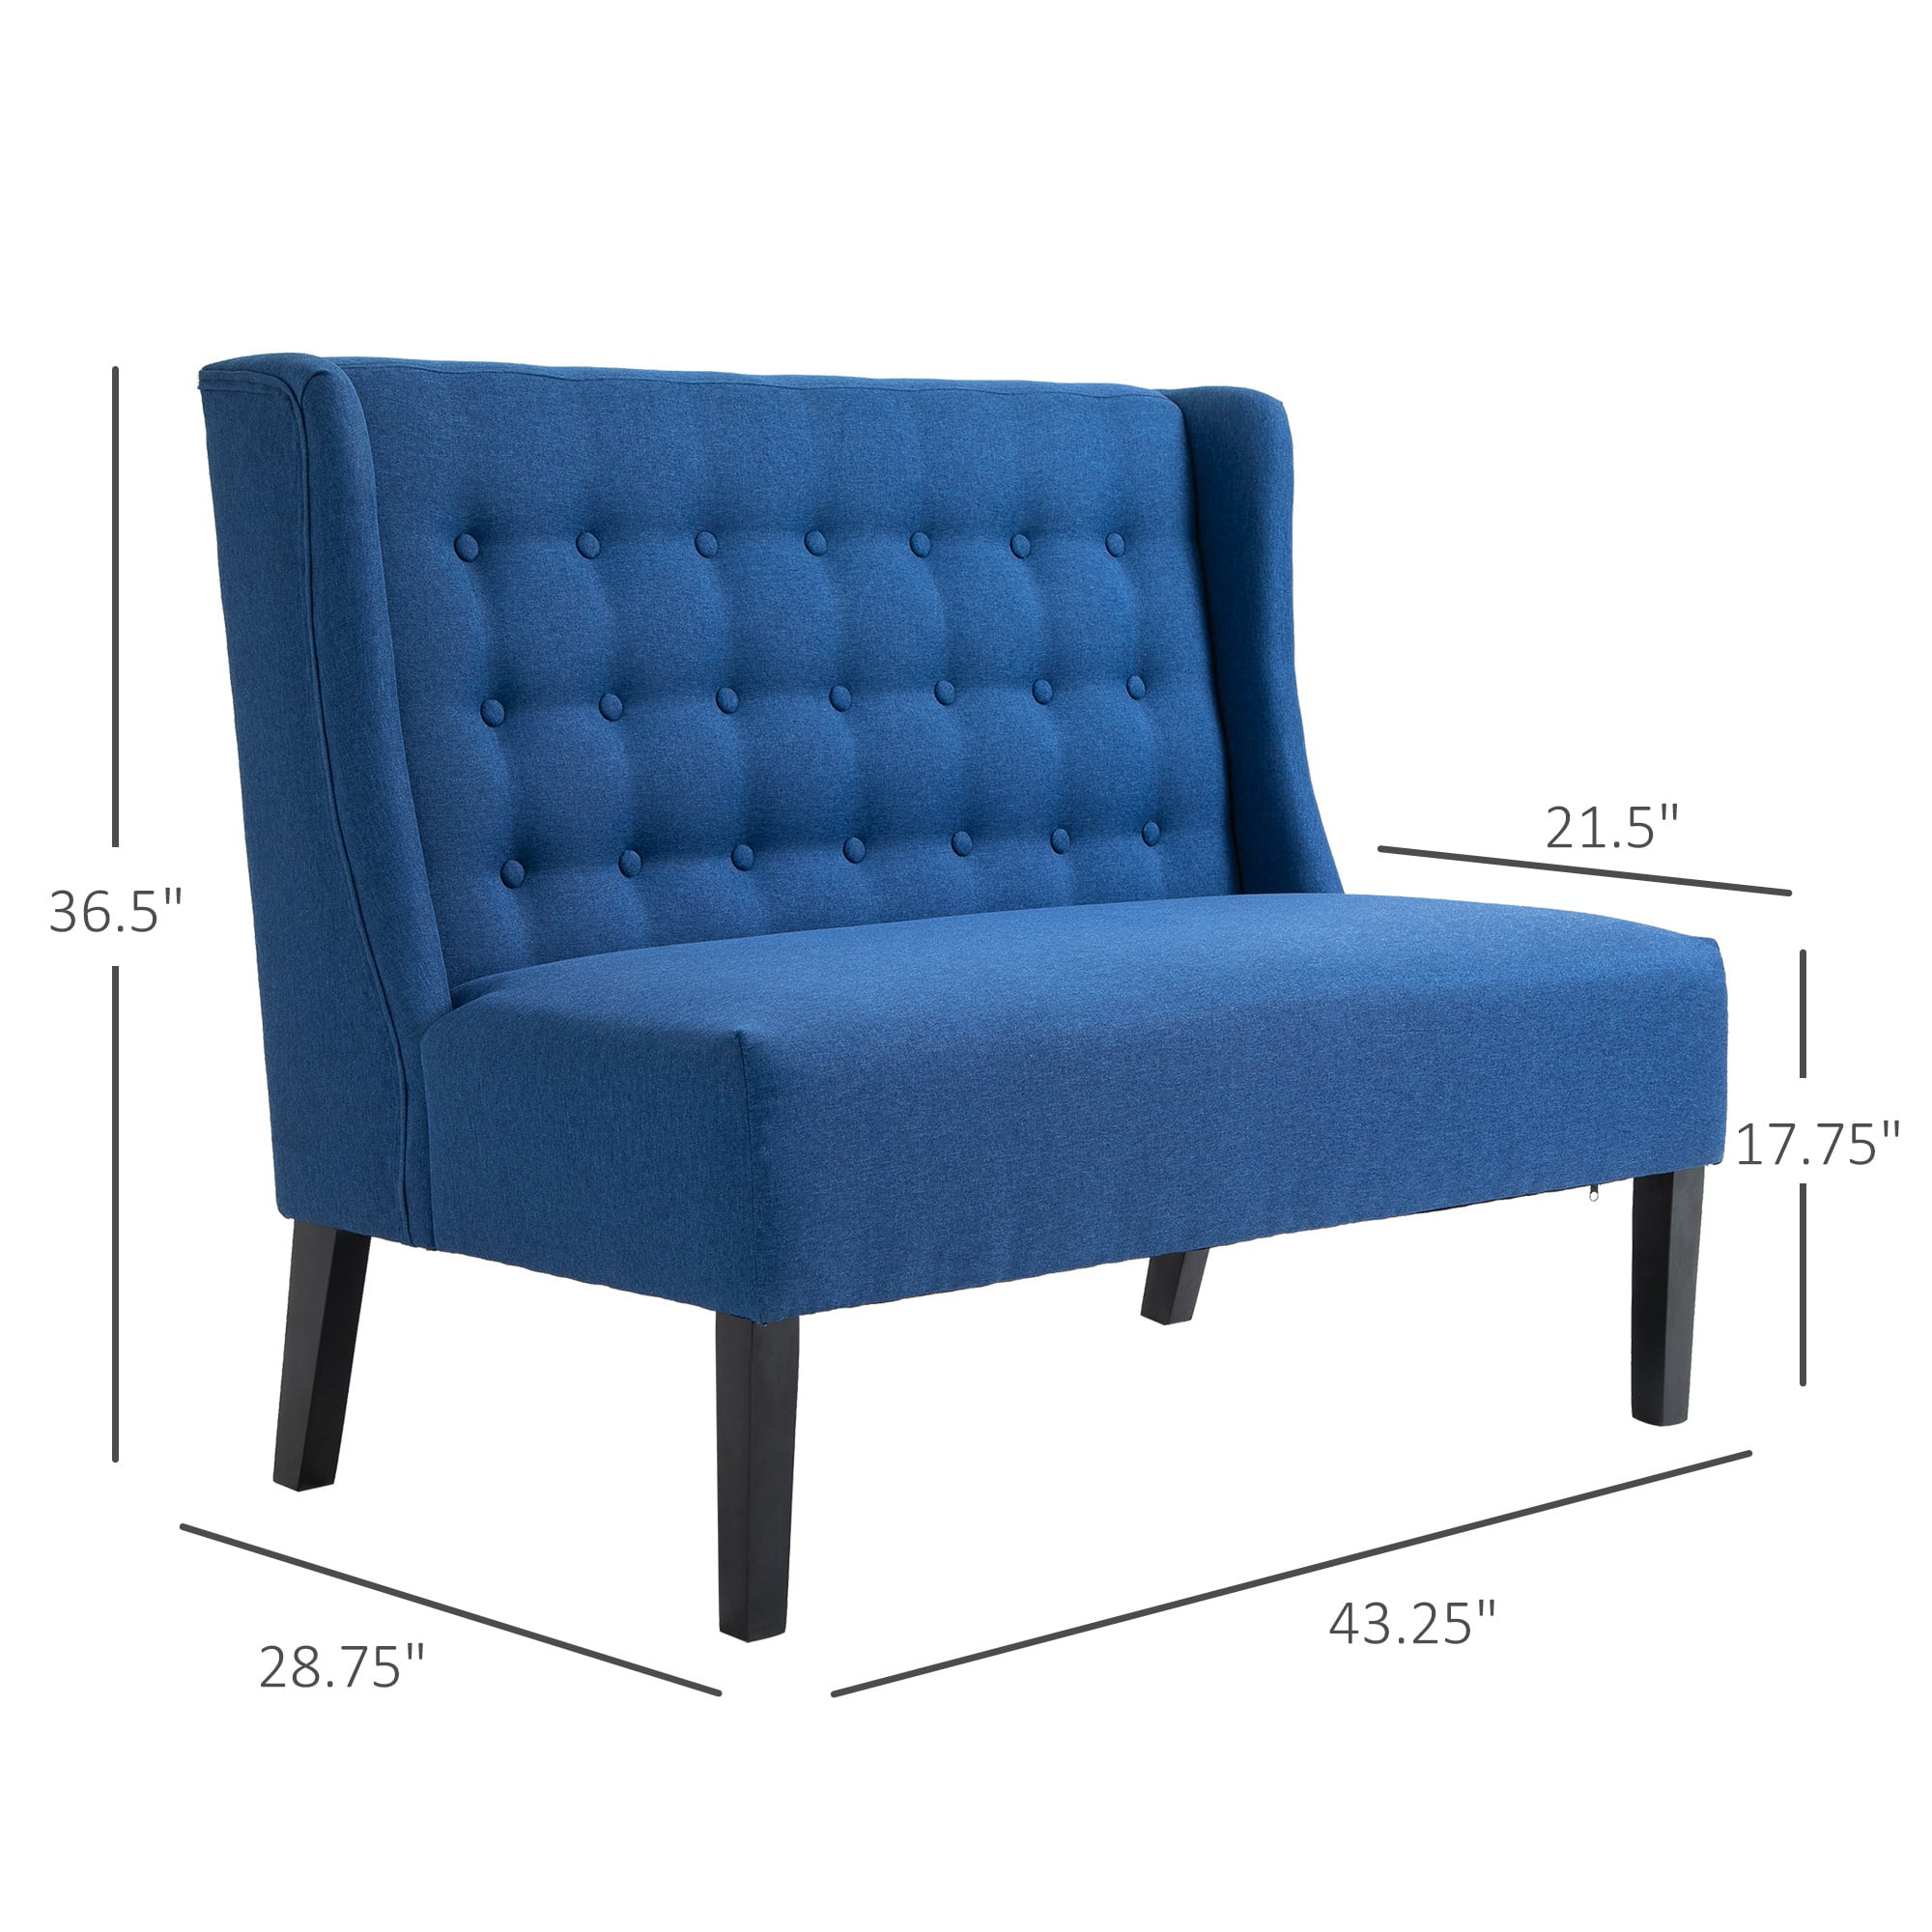 Details about   Armless Fabric Loveseat Double Seat Sofa Tufted Upholstery Couch Living Room 